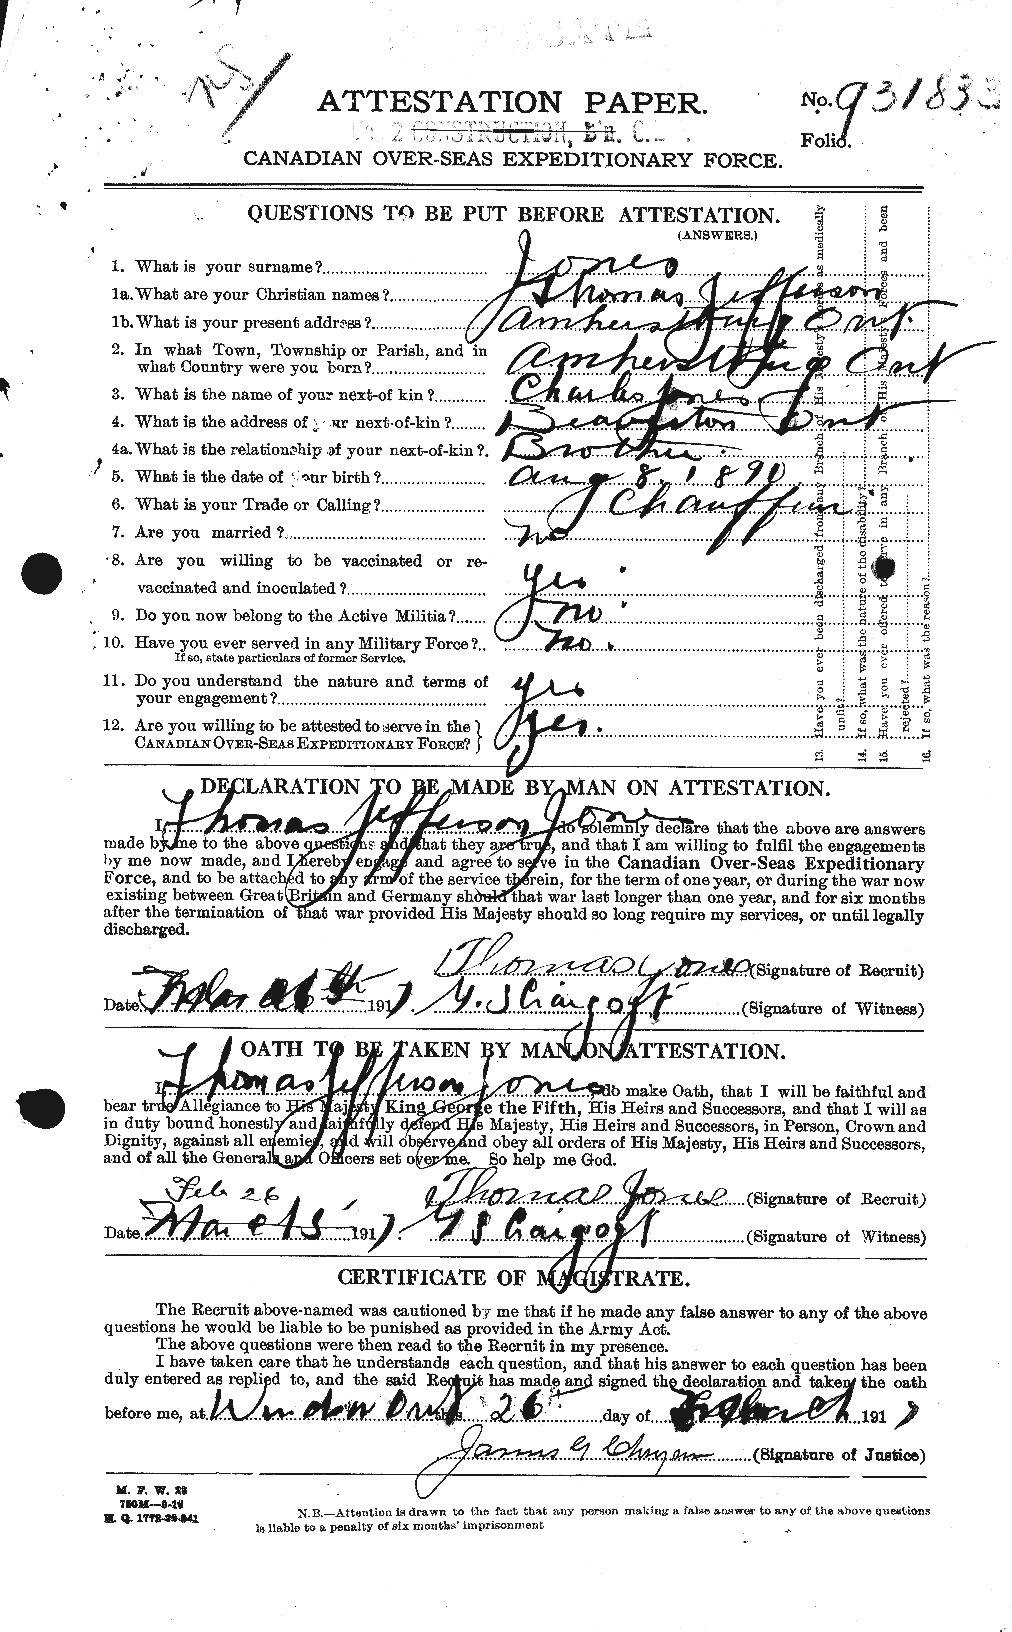 Personnel Records of the First World War - CEF 426665a